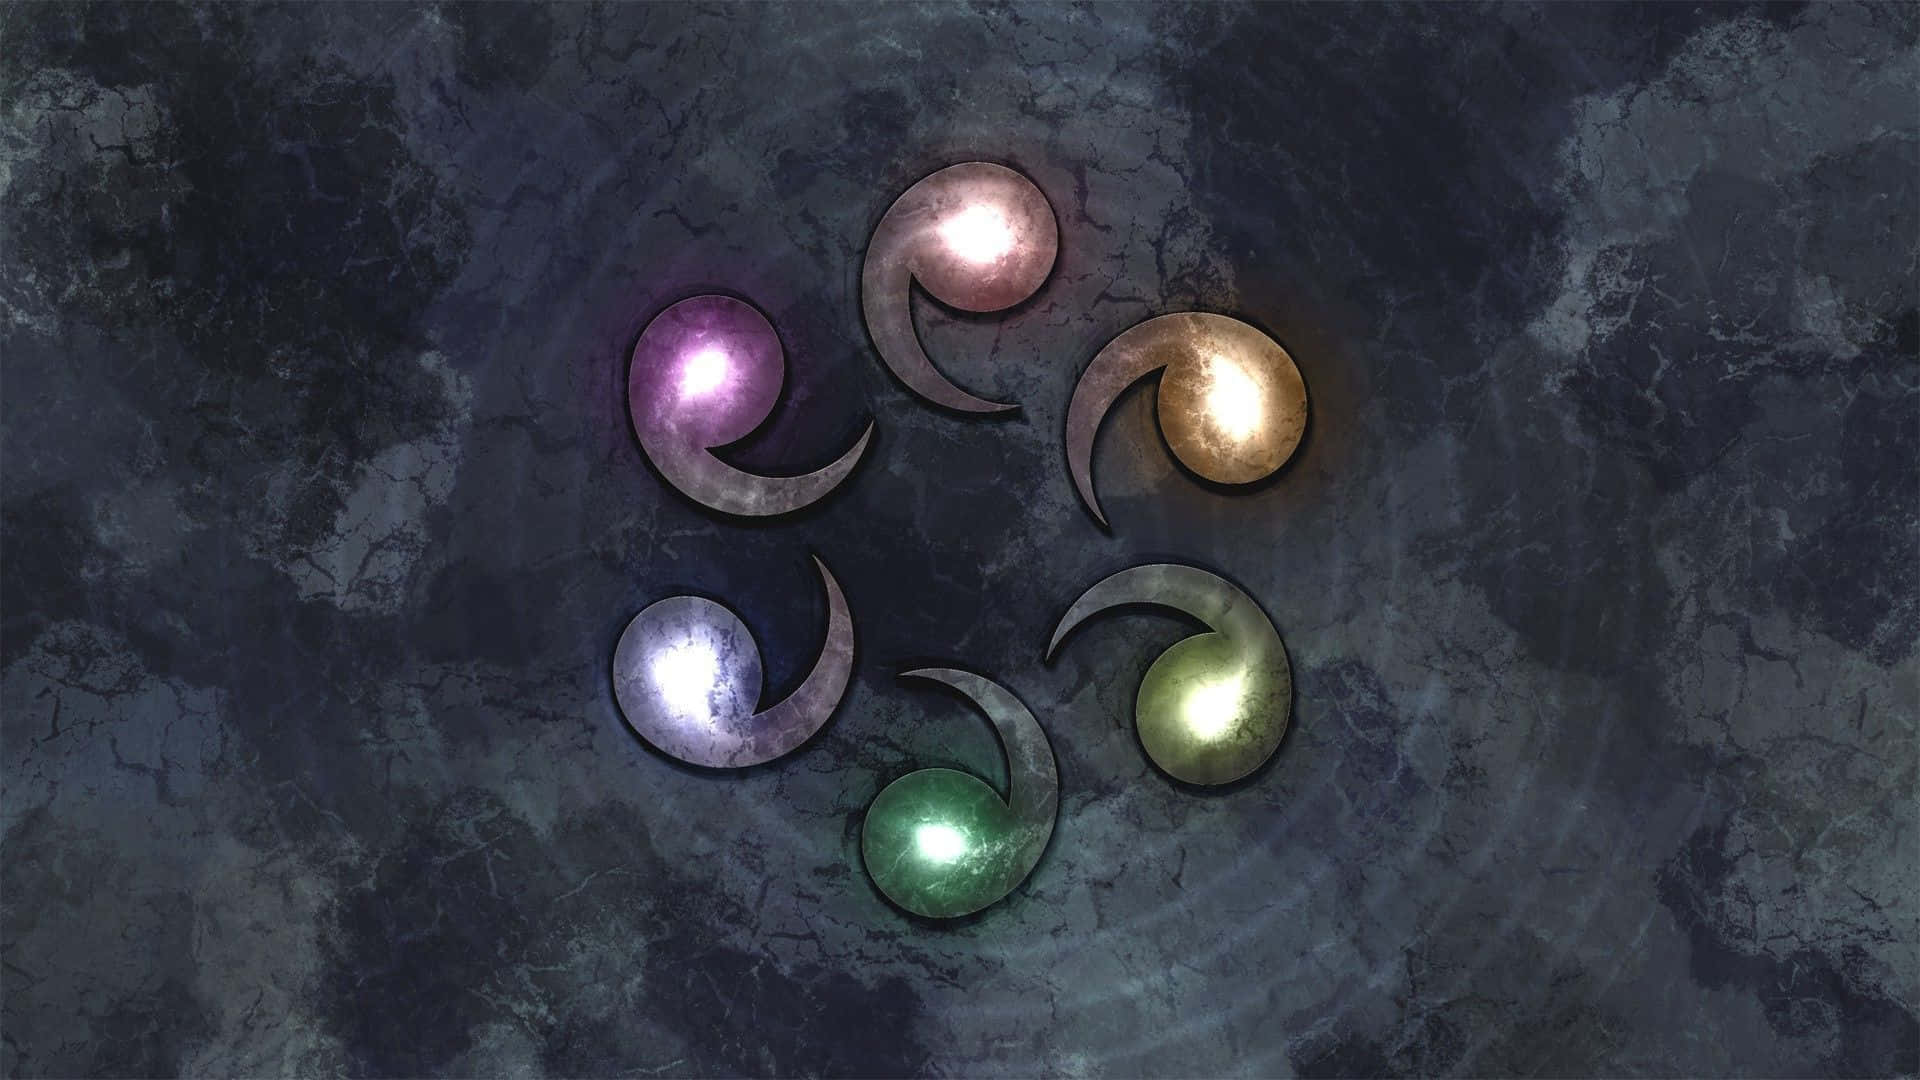 The Sage of Six Paths in full glory Wallpaper